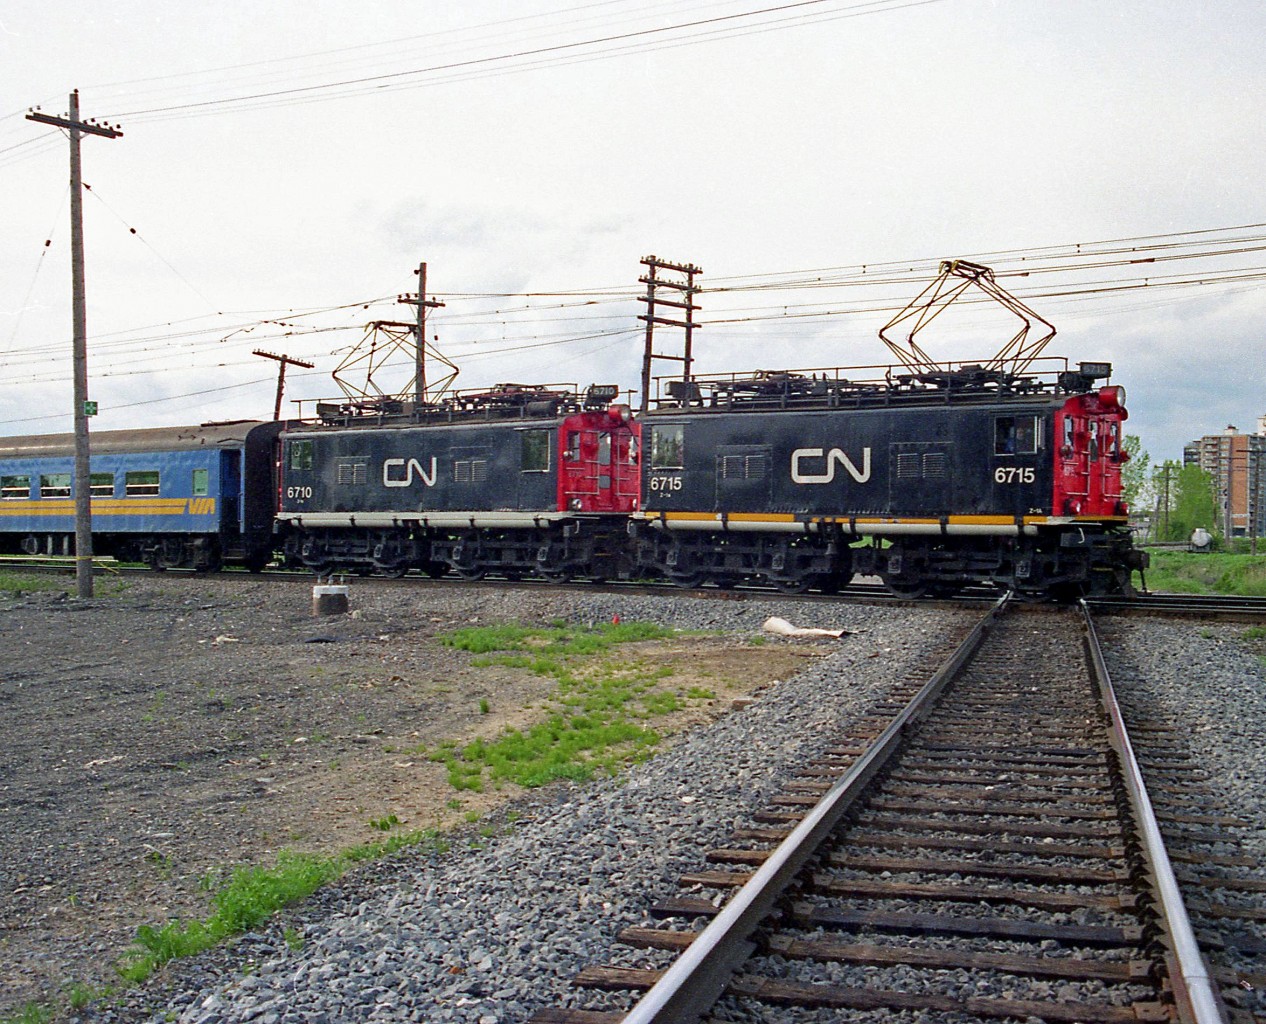 CN Z1a-class GE boxcab electric locomotives 6715 and 6710 (built 1916 and 1914 respectively) handle a commuter train with VIA-painted coaches, crossing the diamond with the CN St. Laurent Subdivision at Eastern Junction in May 1995. It was all but over for CN's vintage electric fleet still employed in Deux-Montagnes commuter service, as the remaining units retired a few months later when the final phase of renovations were completed on the line in Summer/Fall 1995.

Lead unit 6715 is preserved at the National Museum of Science and Technology in Ottawa, while 6710 can be found on display in front of AMT's Deux-Montagnes station.